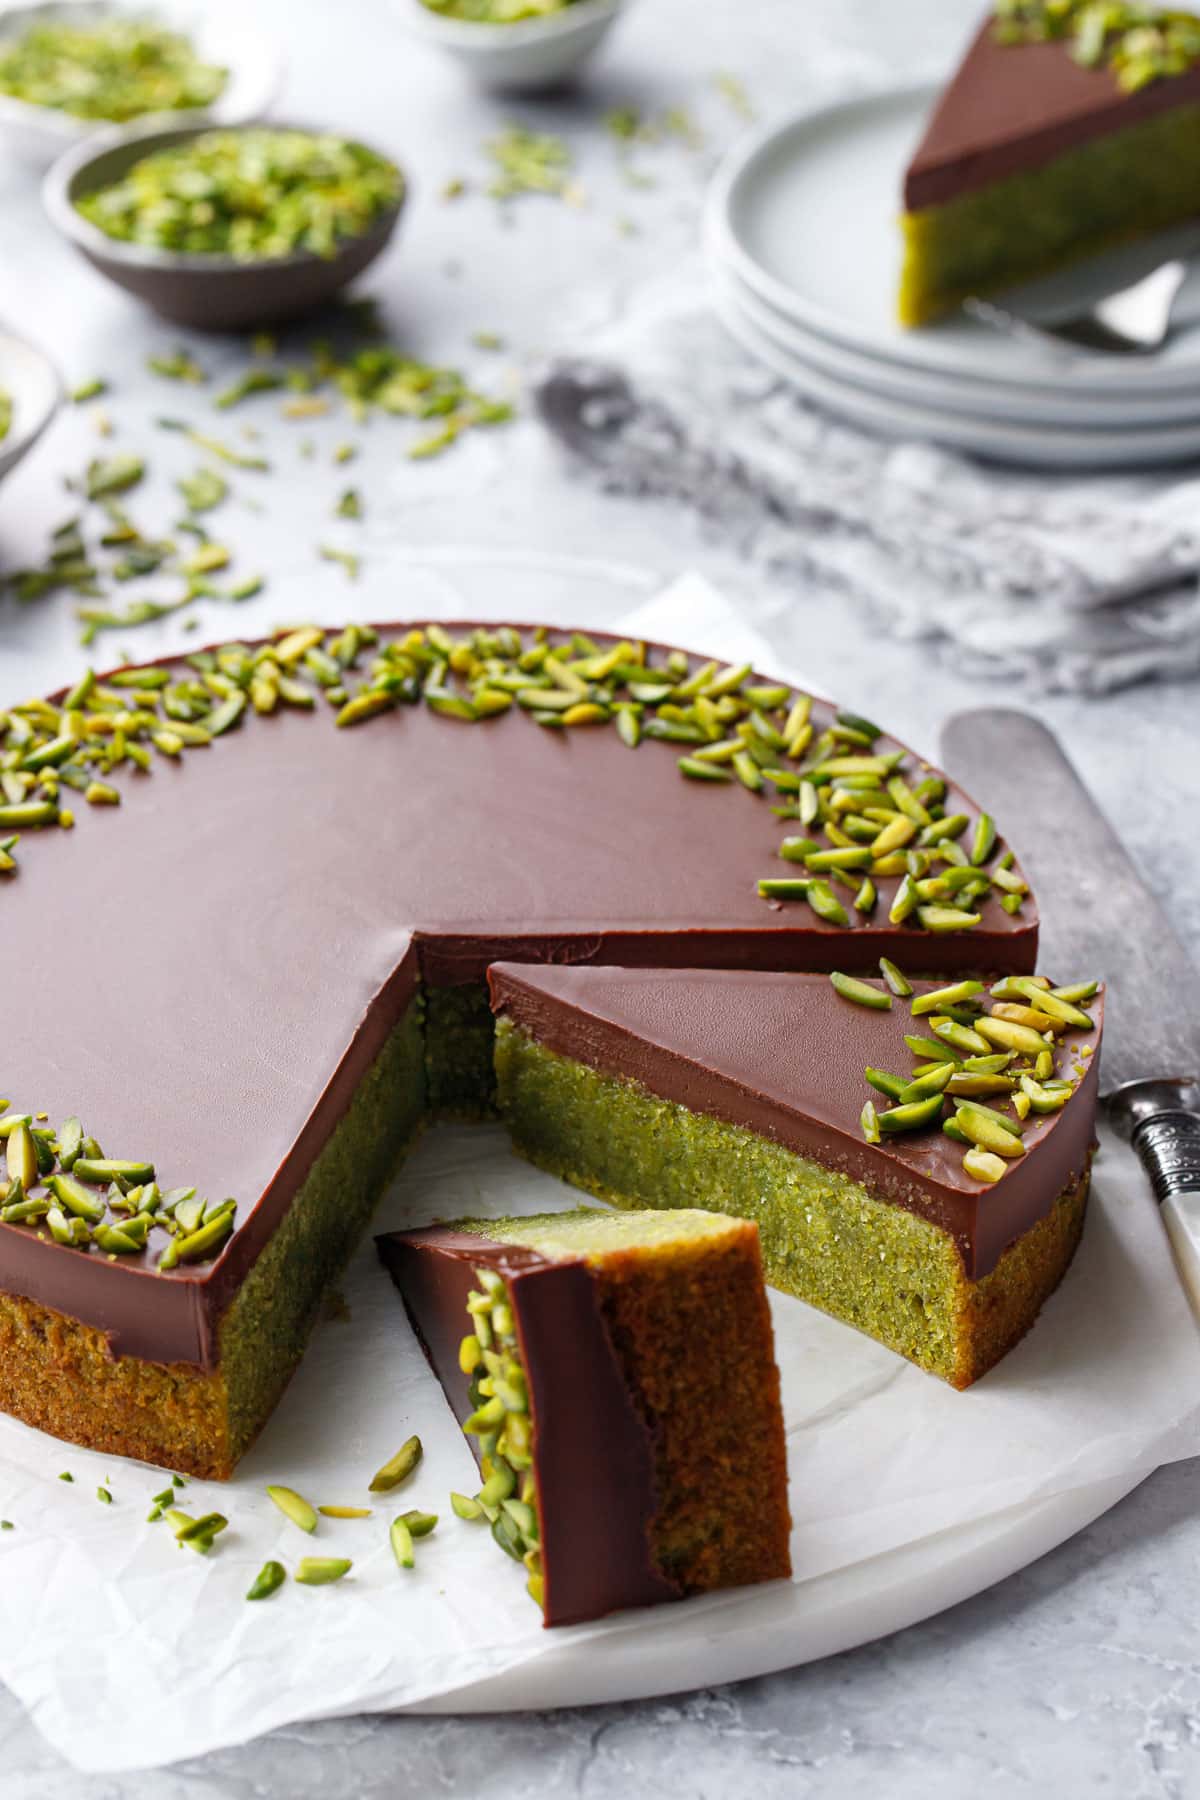 Flourless Pistachio Cake with Chocolate Ganache on a gray background, two slices cut to show the bright green color inside.